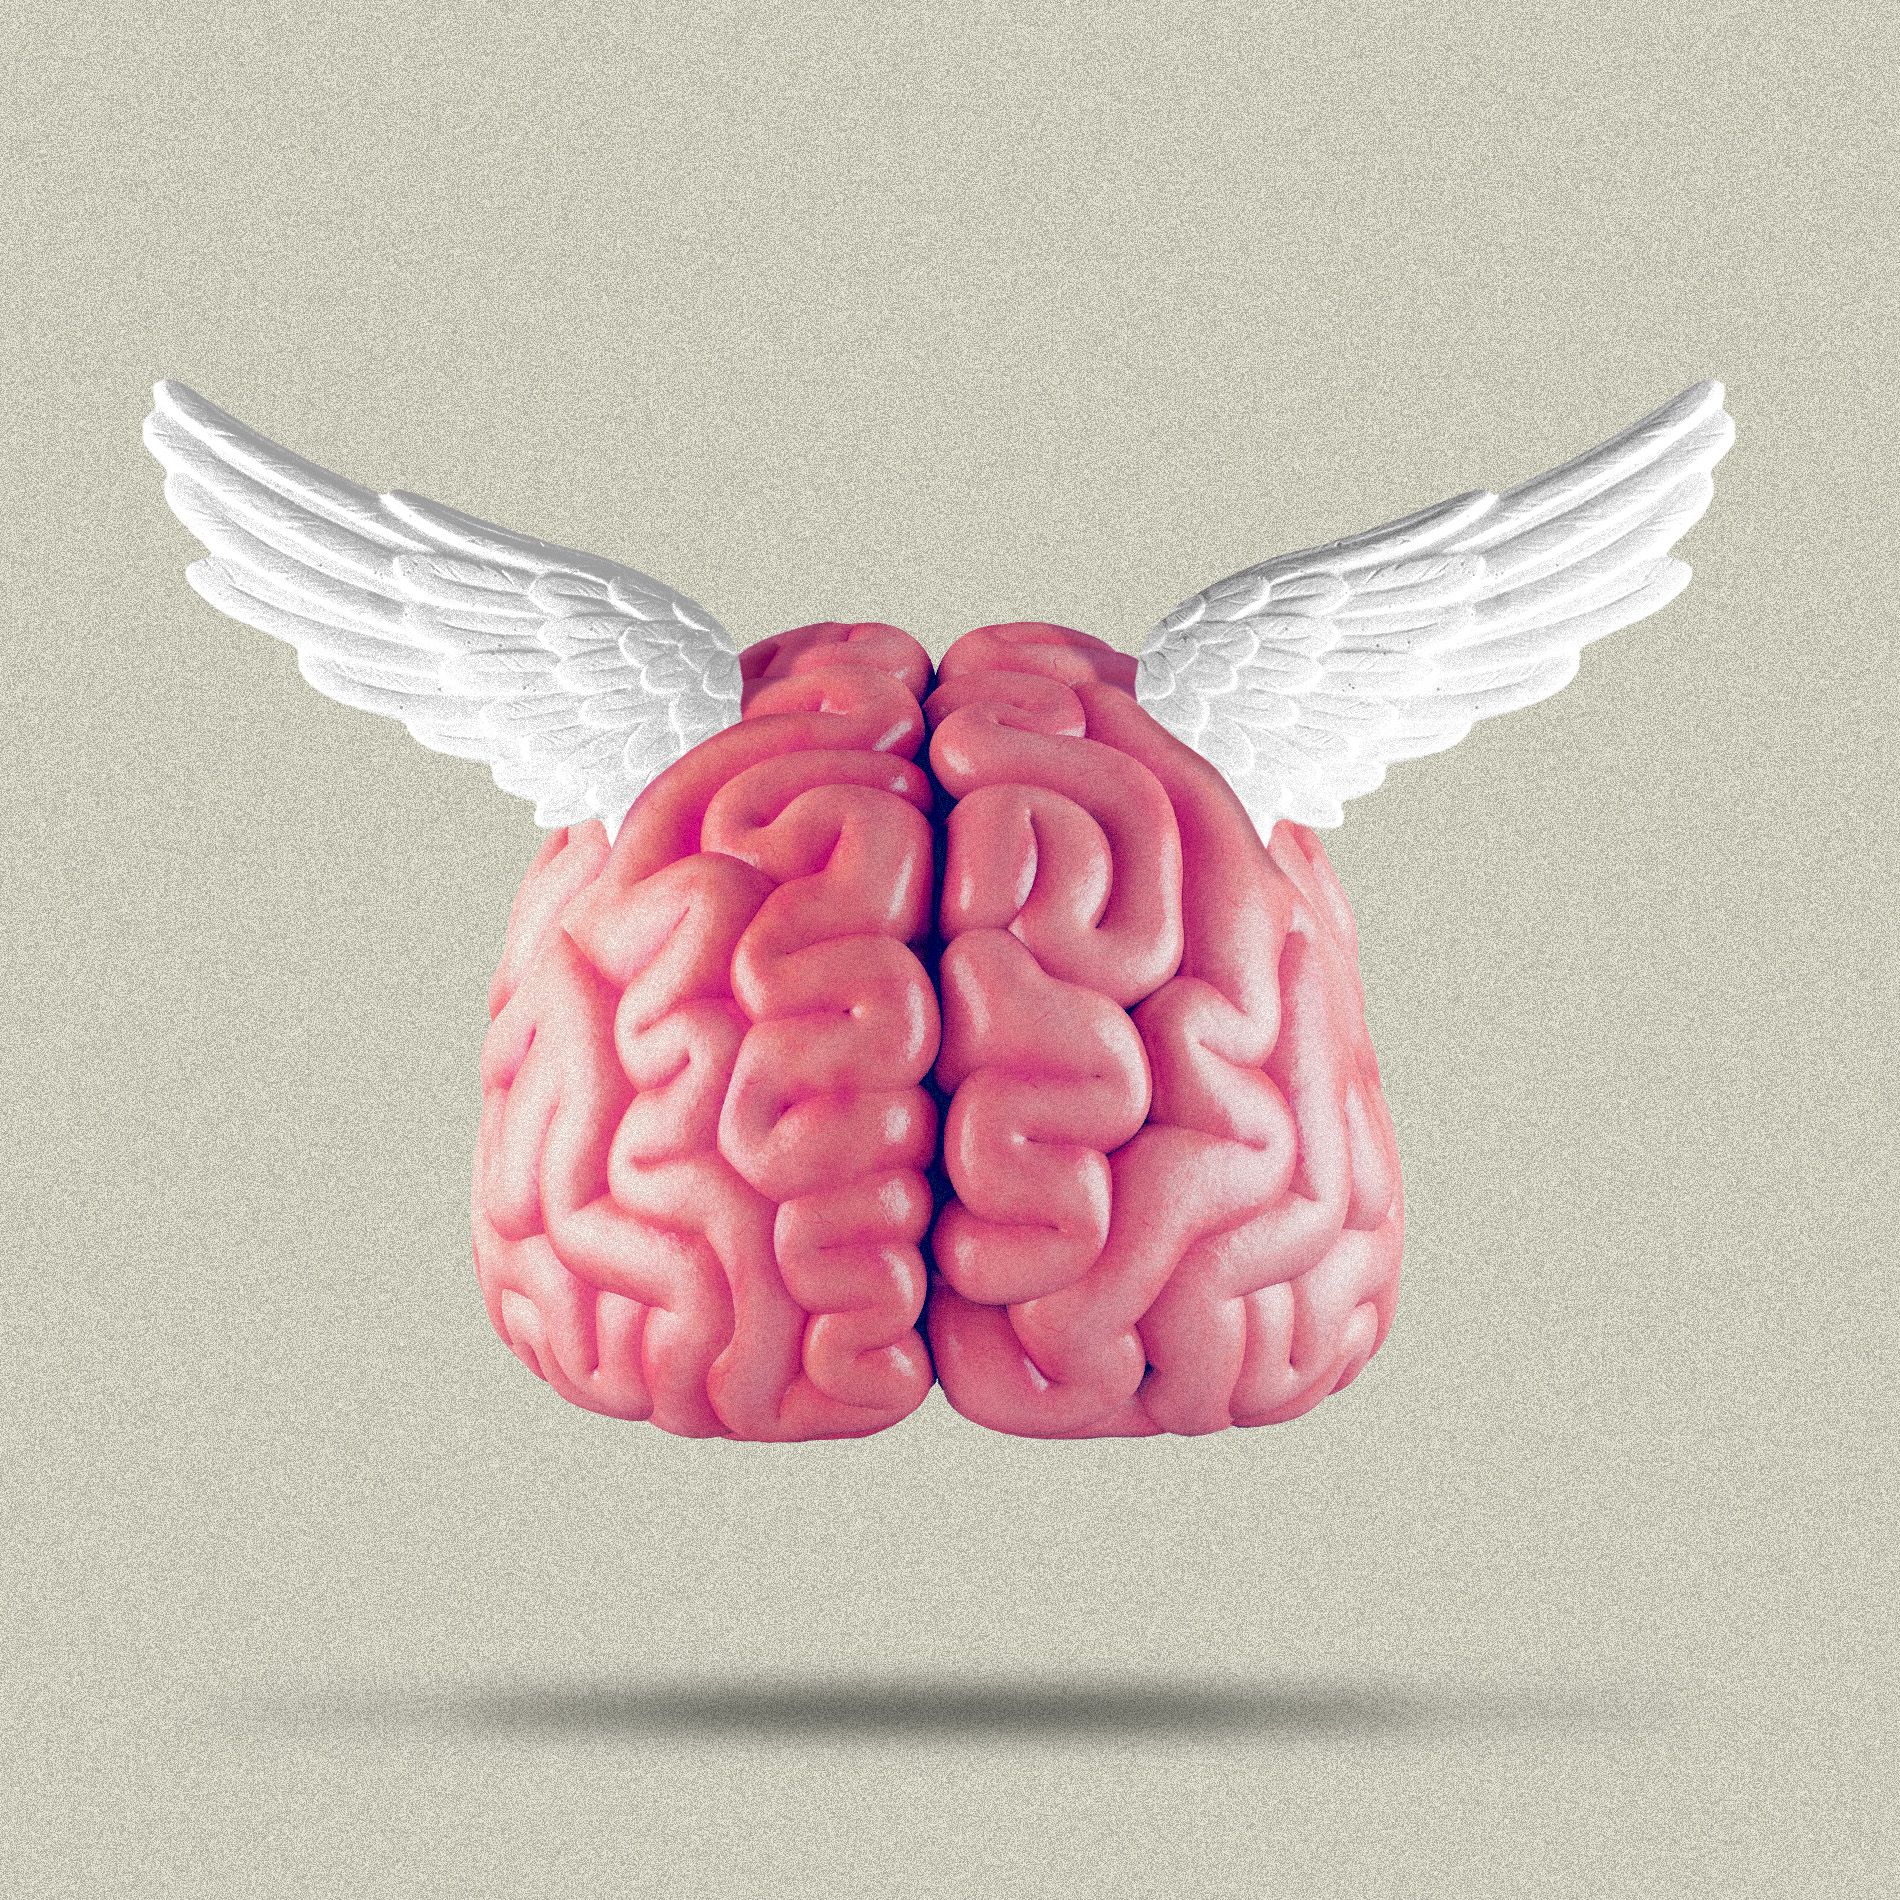 brain with wings illustration